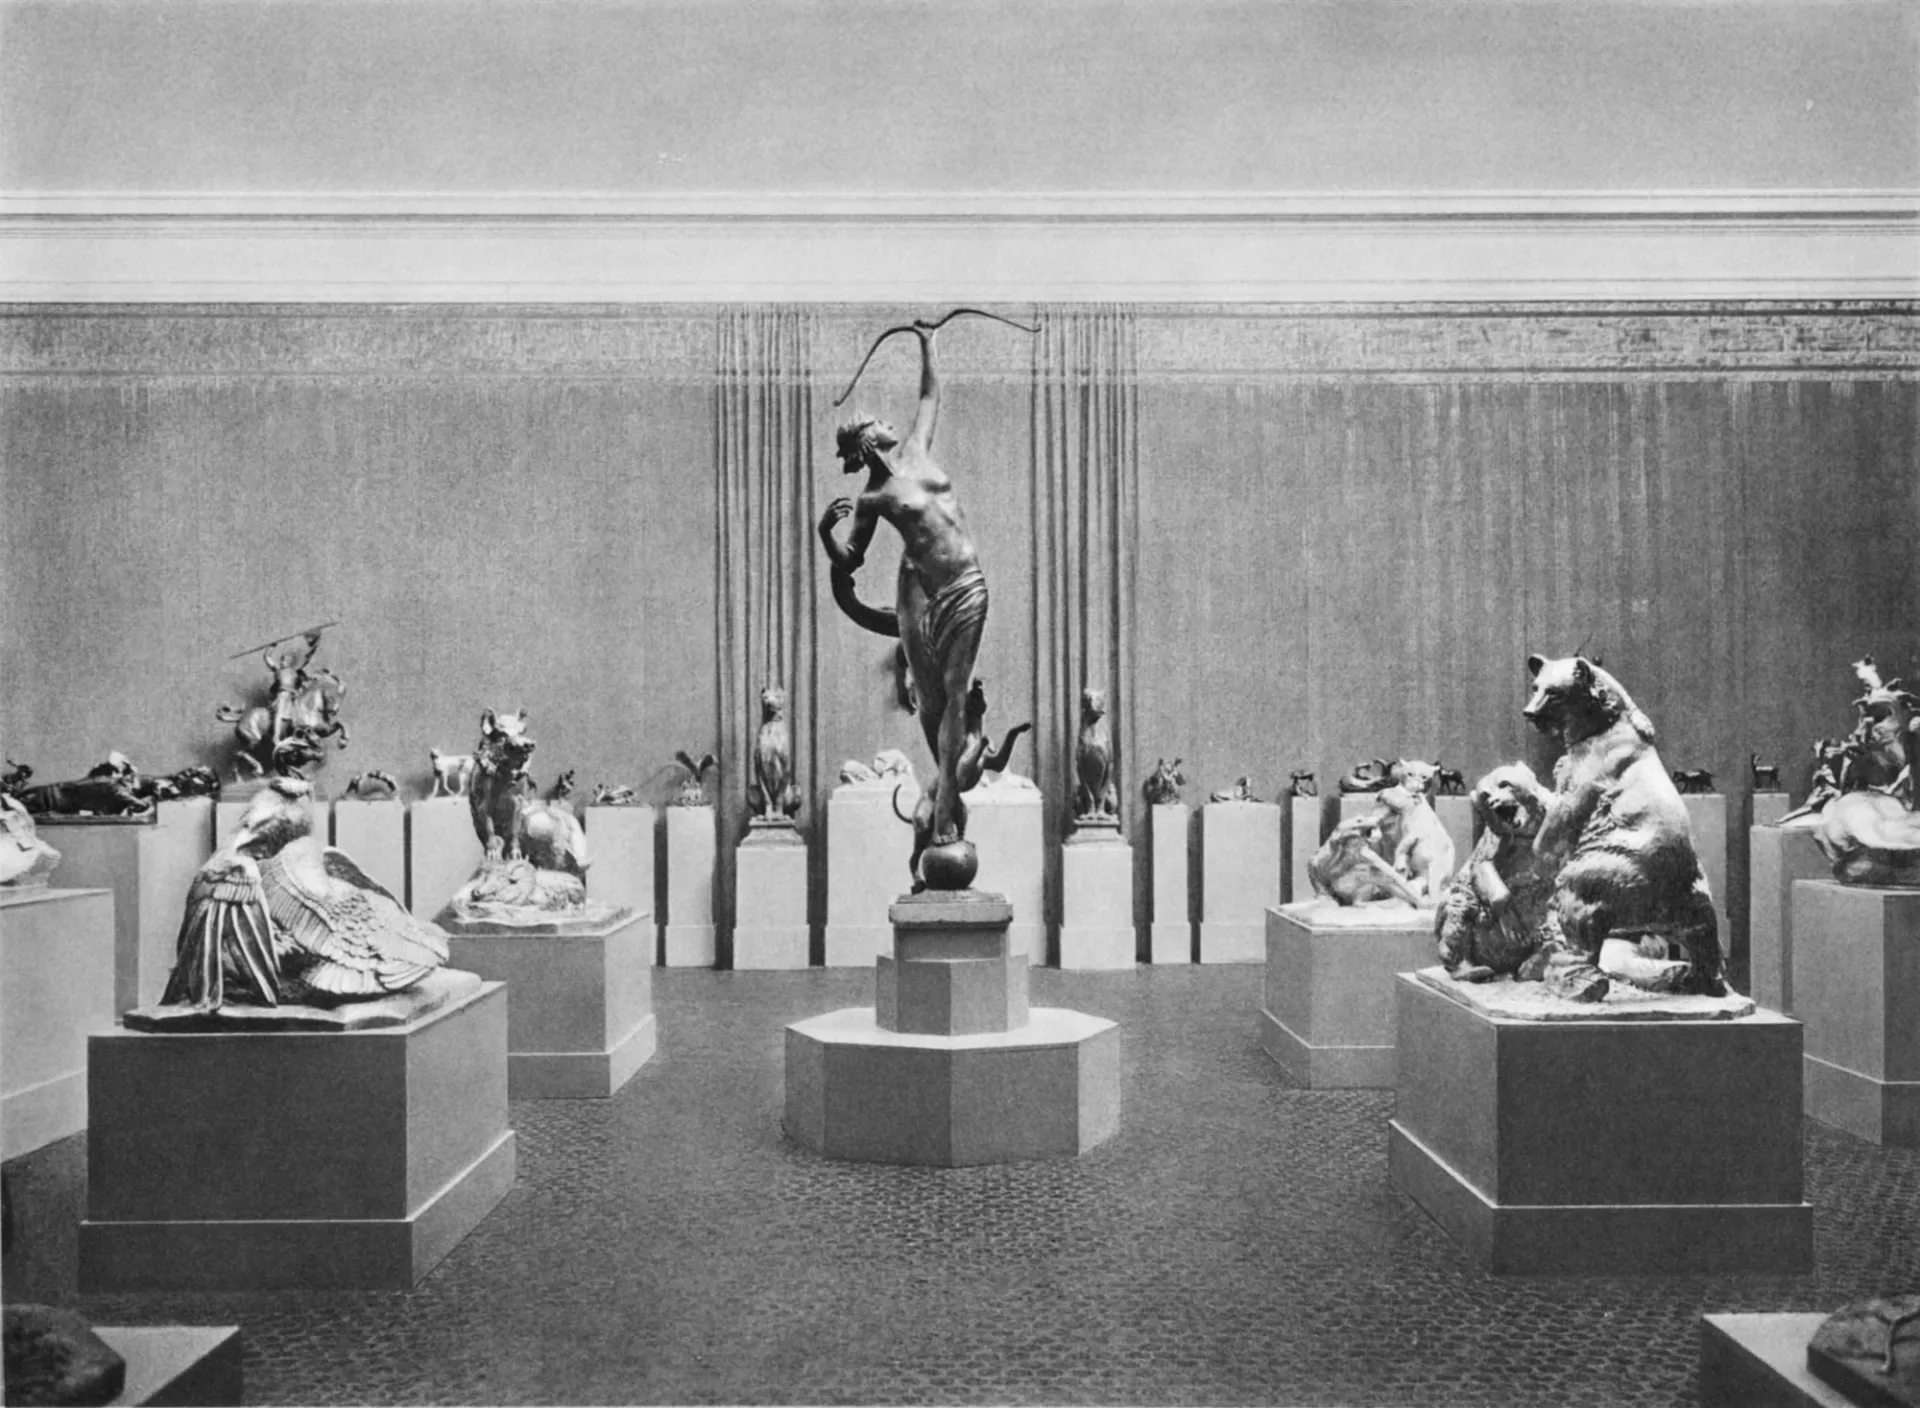 Photograph of sculptures on pedastals in a gallery whose walls are lined with a curtain